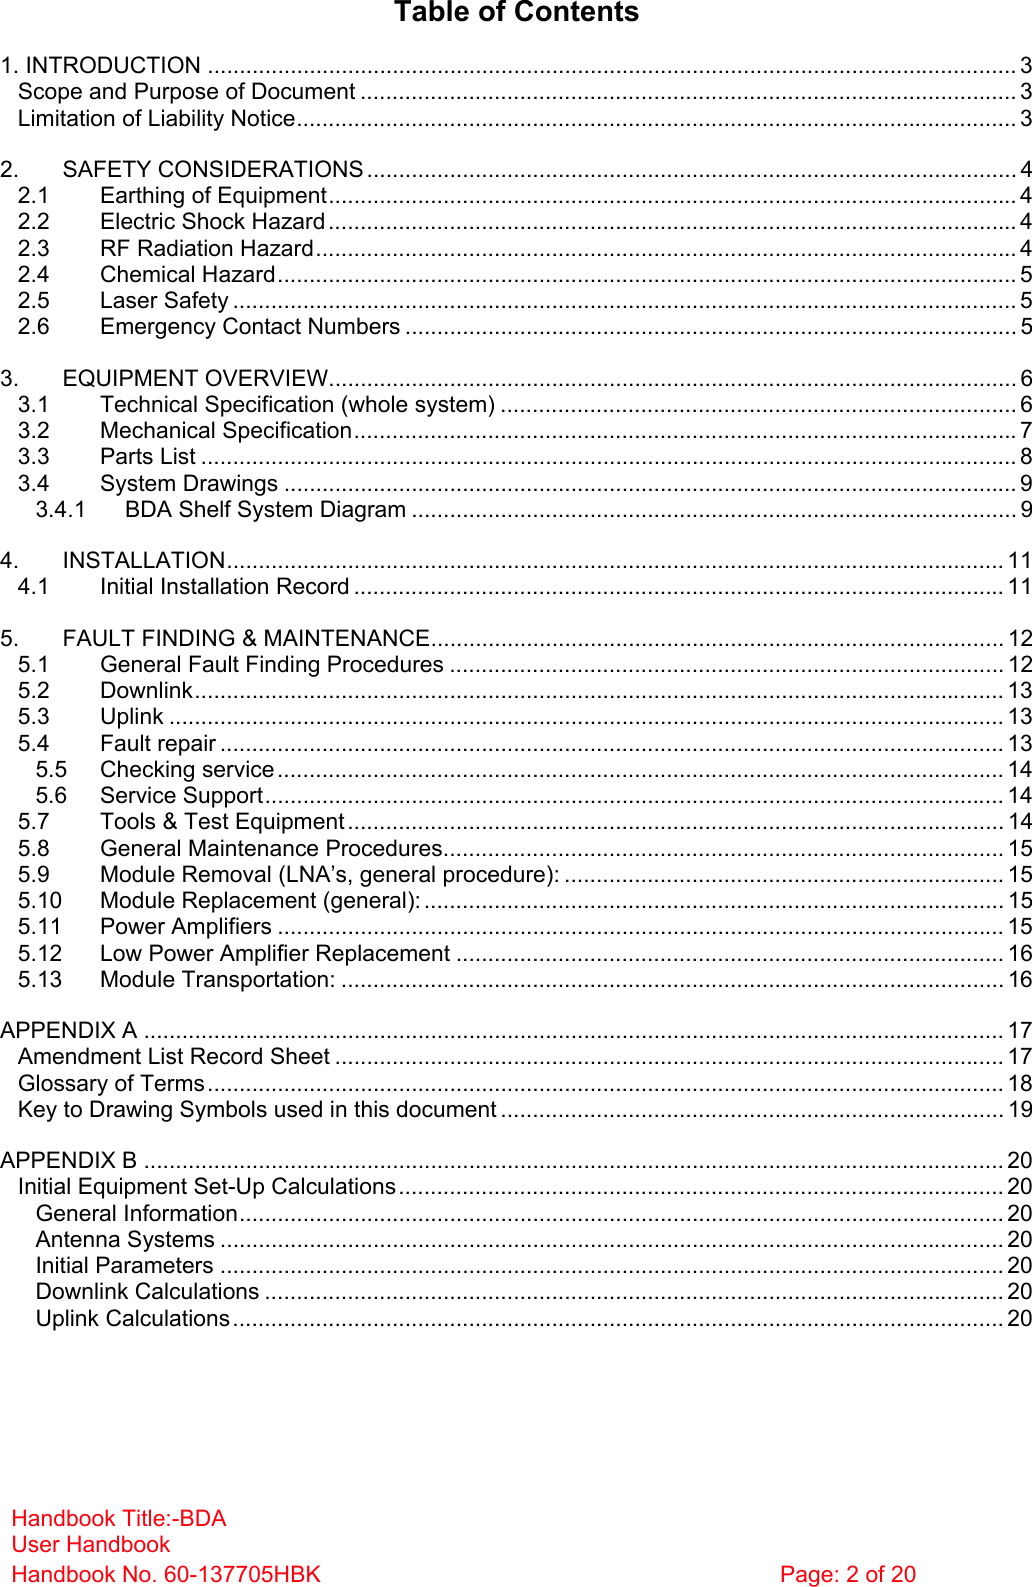 Handbook Title:-BDA User Handbook Handbook No. 60-137705HBK  Page: 2 of 20   Table of Contents 1. INTRODUCTION ............................................................................................................................... 3 Scope and Purpose of Document ....................................................................................................... 3 Limitation of Liability Notice................................................................................................................. 3 2. SAFETY CONSIDERATIONS ...................................................................................................... 4 2.1 Earthing of Equipment............................................................................................................ 4 2.2 Electric Shock Hazard............................................................................................................ 4 2.3 RF Radiation Hazard.............................................................................................................. 4 2.4 Chemical Hazard.................................................................................................................... 5 2.5 Laser Safety ........................................................................................................................... 5 2.6 Emergency Contact Numbers ................................................................................................ 5 3. EQUIPMENT OVERVIEW............................................................................................................ 6 3.1 Technical Specification (whole system) ................................................................................. 6 3.2 Mechanical Specification........................................................................................................7 3.3 Parts List ................................................................................................................................ 8 3.4 System Drawings ................................................................................................................... 9 3.4.1 BDA Shelf System Diagram ............................................................................................... 9 4. INSTALLATION.......................................................................................................................... 11 4.1 Initial Installation Record ...................................................................................................... 11 5. FAULT FINDING &amp; MAINTENANCE.......................................................................................... 12 5.1 General Fault Finding Procedures ....................................................................................... 12 5.2 Downlink............................................................................................................................... 13 5.3 Uplink ................................................................................................................................... 13 5.4 Fault repair ........................................................................................................................... 13 5.5 Checking service.................................................................................................................. 14 5.6 Service Support.................................................................................................................... 14 5.7 Tools &amp; Test Equipment....................................................................................................... 14 5.8 General Maintenance Procedures........................................................................................ 15 5.9 Module Removal (LNA’s, general procedure): ..................................................................... 15 5.10 Module Replacement (general): ........................................................................................... 15 5.11 Power Amplifiers .................................................................................................................. 15 5.12 Low Power Amplifier Replacement ...................................................................................... 16 5.13 Module Transportation: ........................................................................................................ 16 APPENDIX A ....................................................................................................................................... 17 Amendment List Record Sheet ......................................................................................................... 17 Glossary of Terms............................................................................................................................. 18 Key to Drawing Symbols used in this document ............................................................................... 19 APPENDIX B ....................................................................................................................................... 20 Initial Equipment Set-Up Calculations............................................................................................... 20 General Information........................................................................................................................ 20 Antenna Systems ........................................................................................................................... 20 Initial Parameters ........................................................................................................................... 20 Downlink Calculations .................................................................................................................... 20 Uplink Calculations......................................................................................................................... 20    